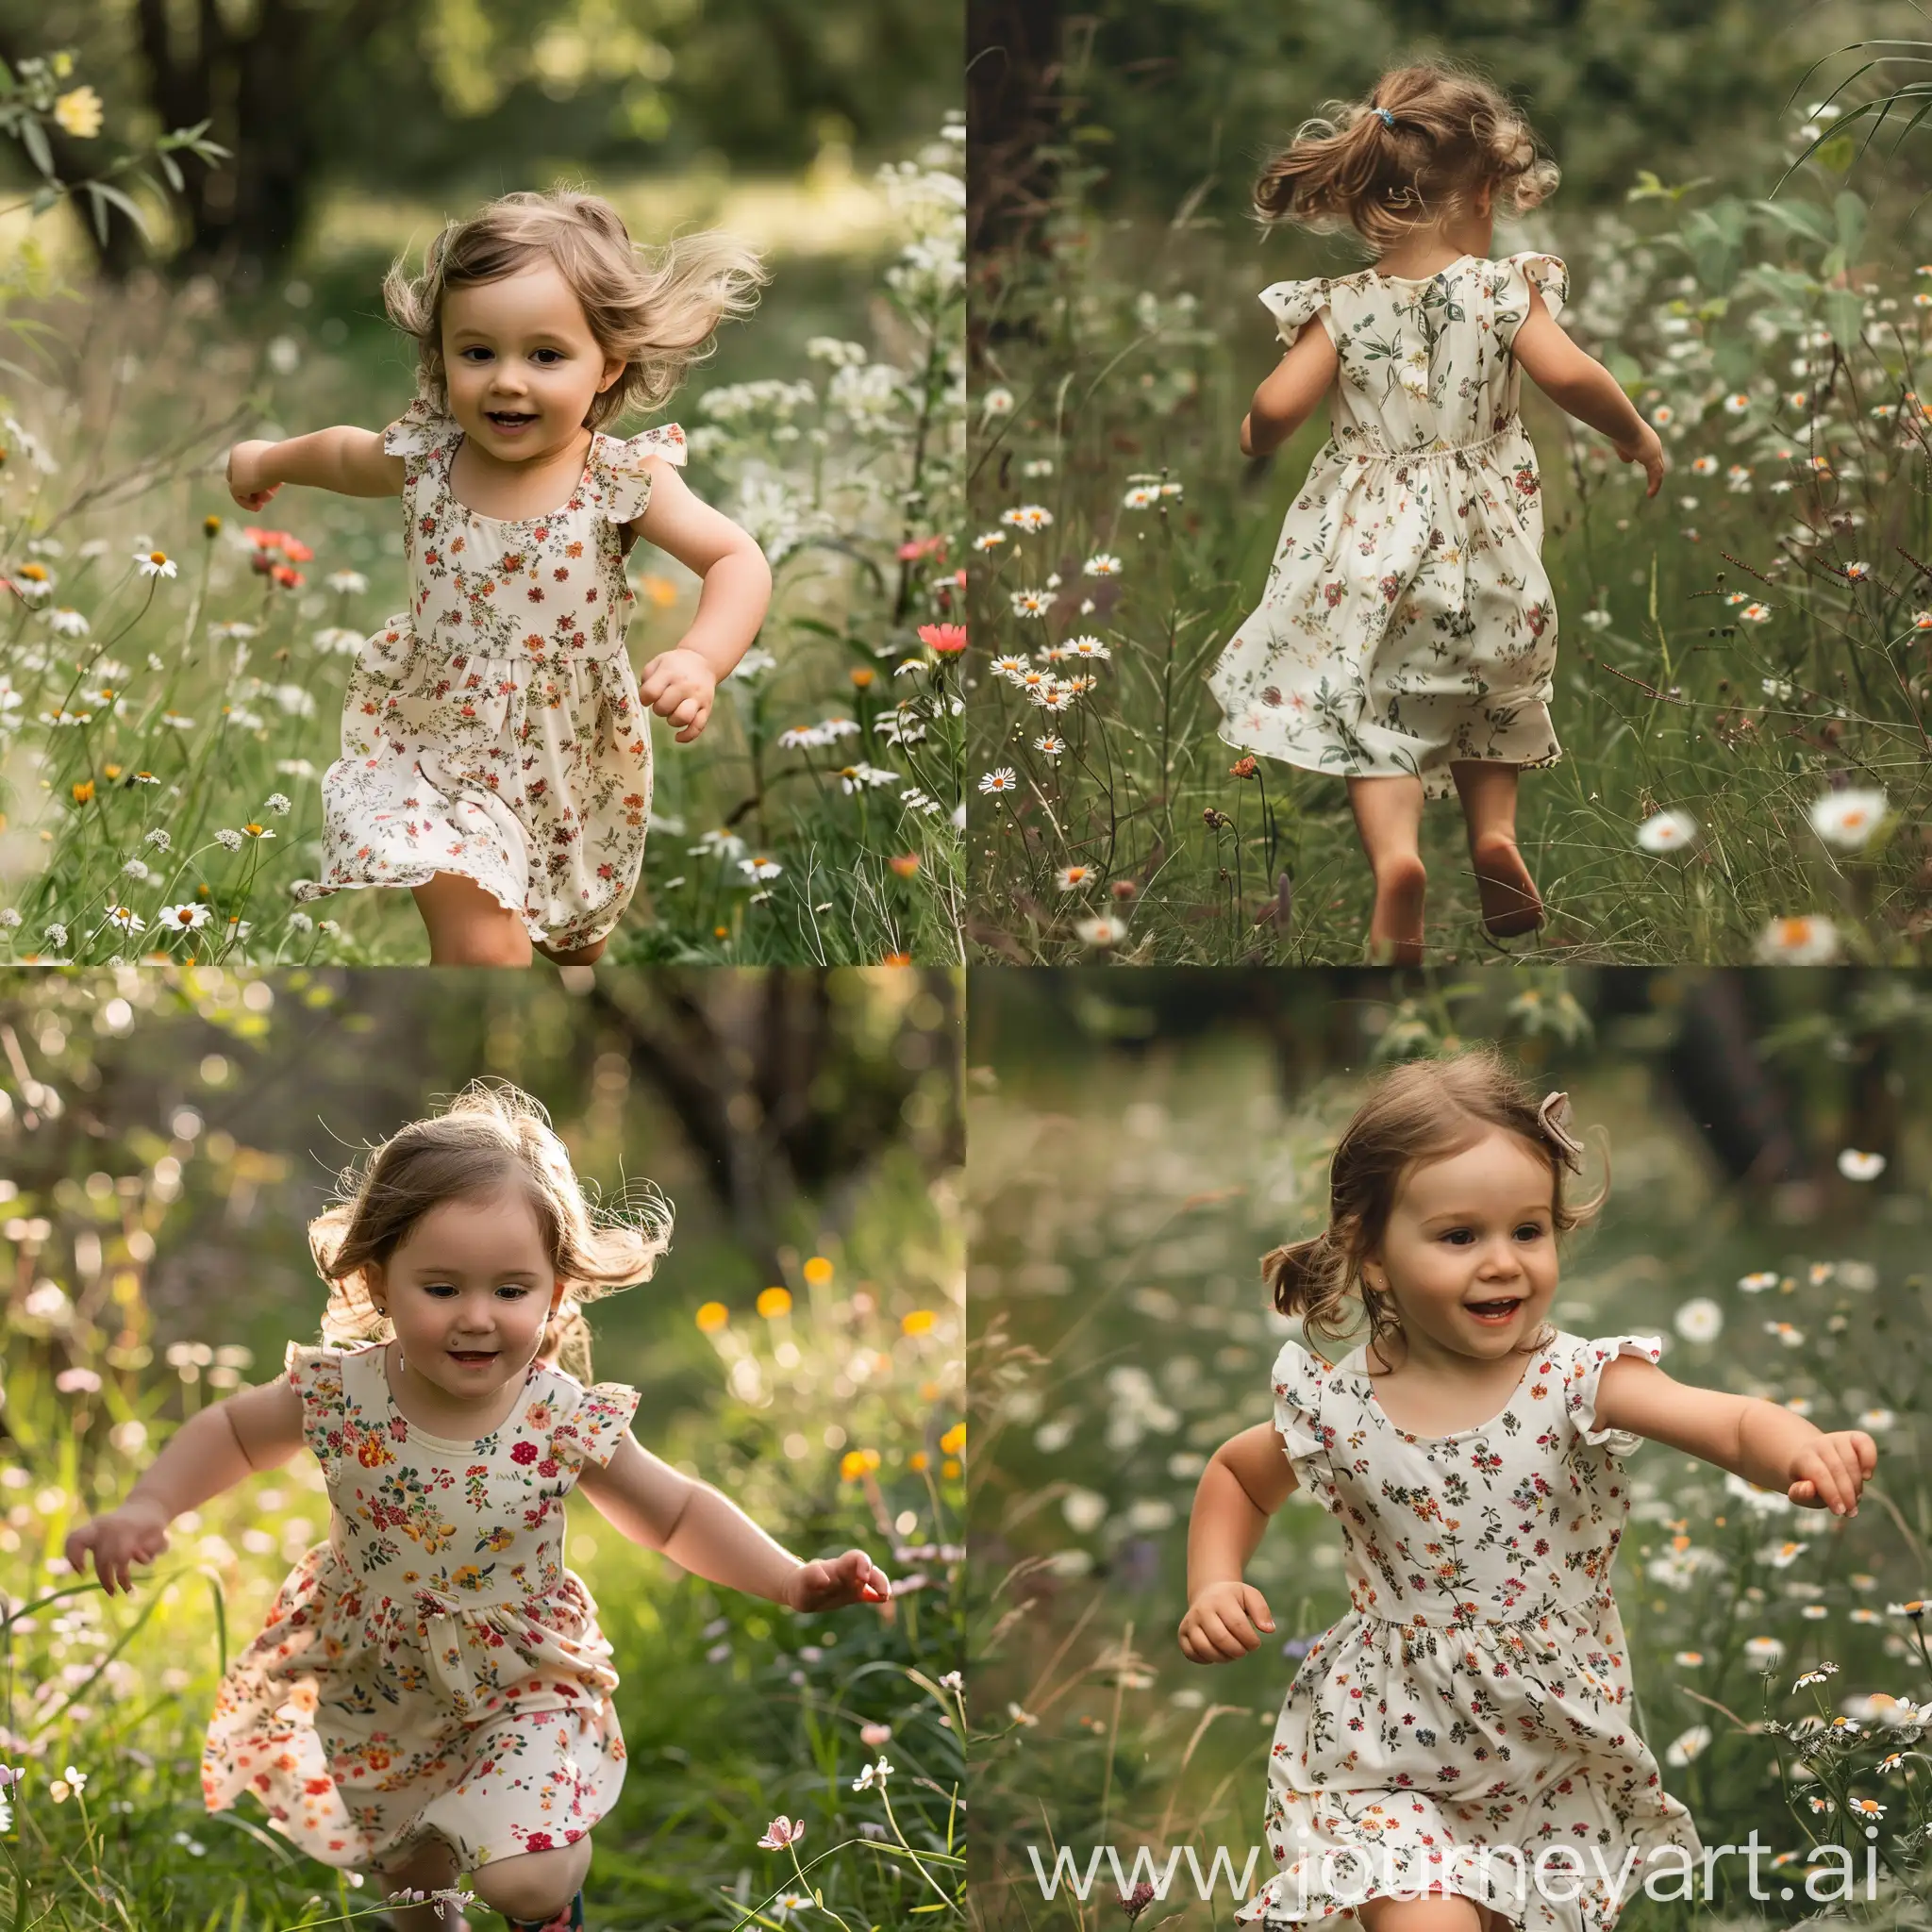 Adorable-Girl-Frolicking-in-Meadow-Amidst-Wildflowers